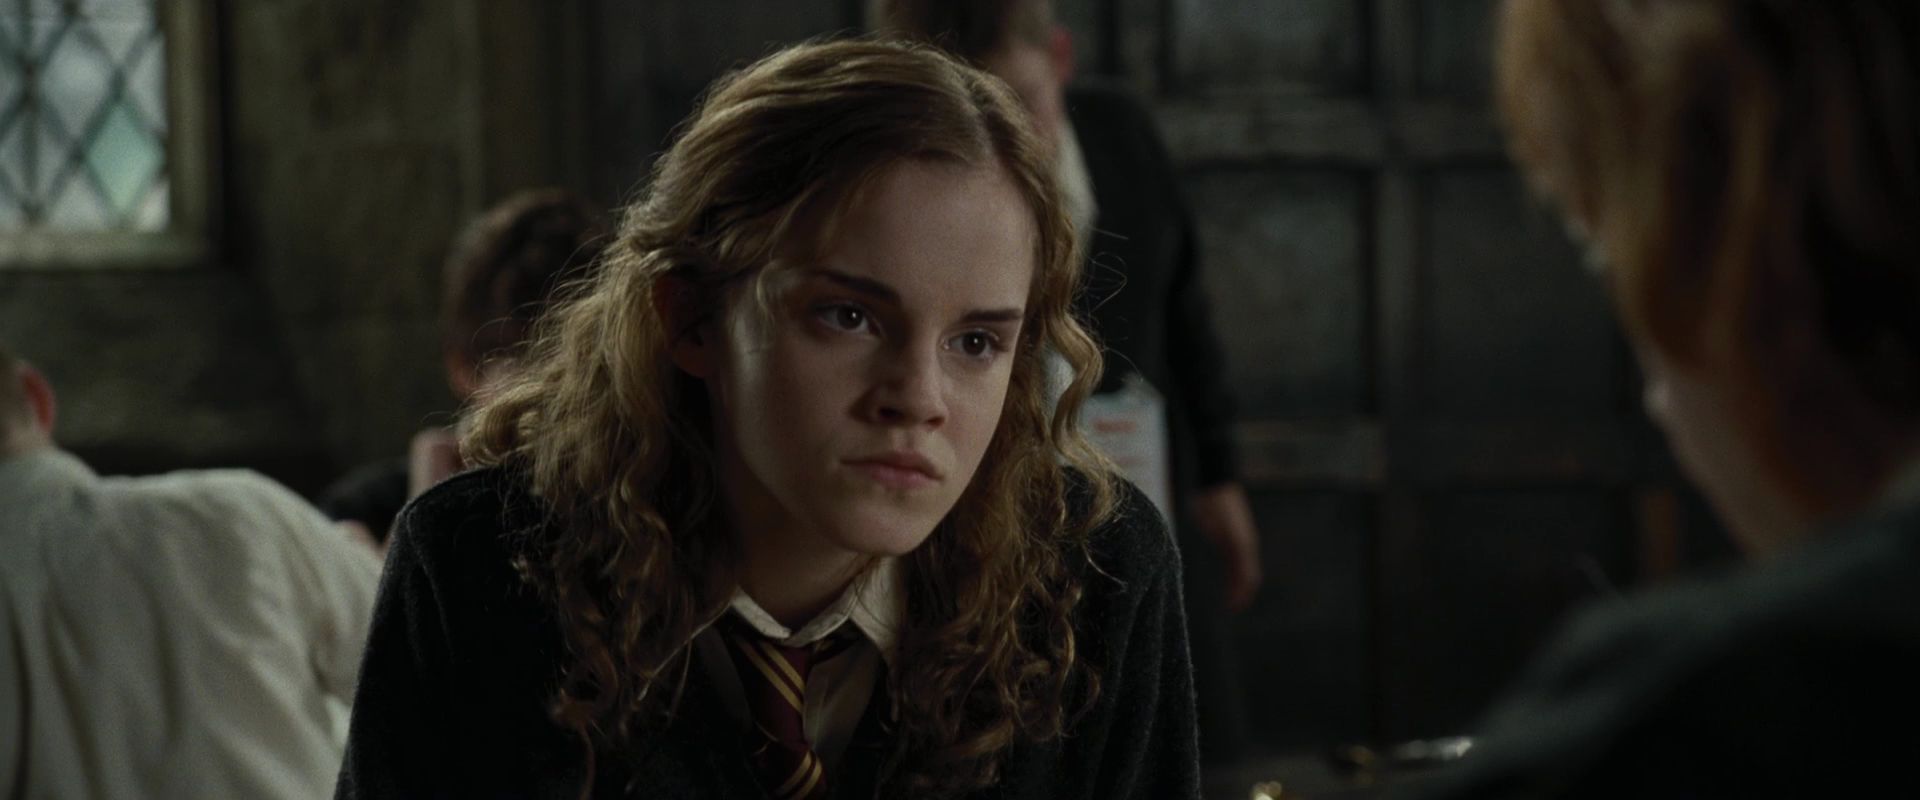 Hermione Granger Image: Hermione - Goblet of Fire.